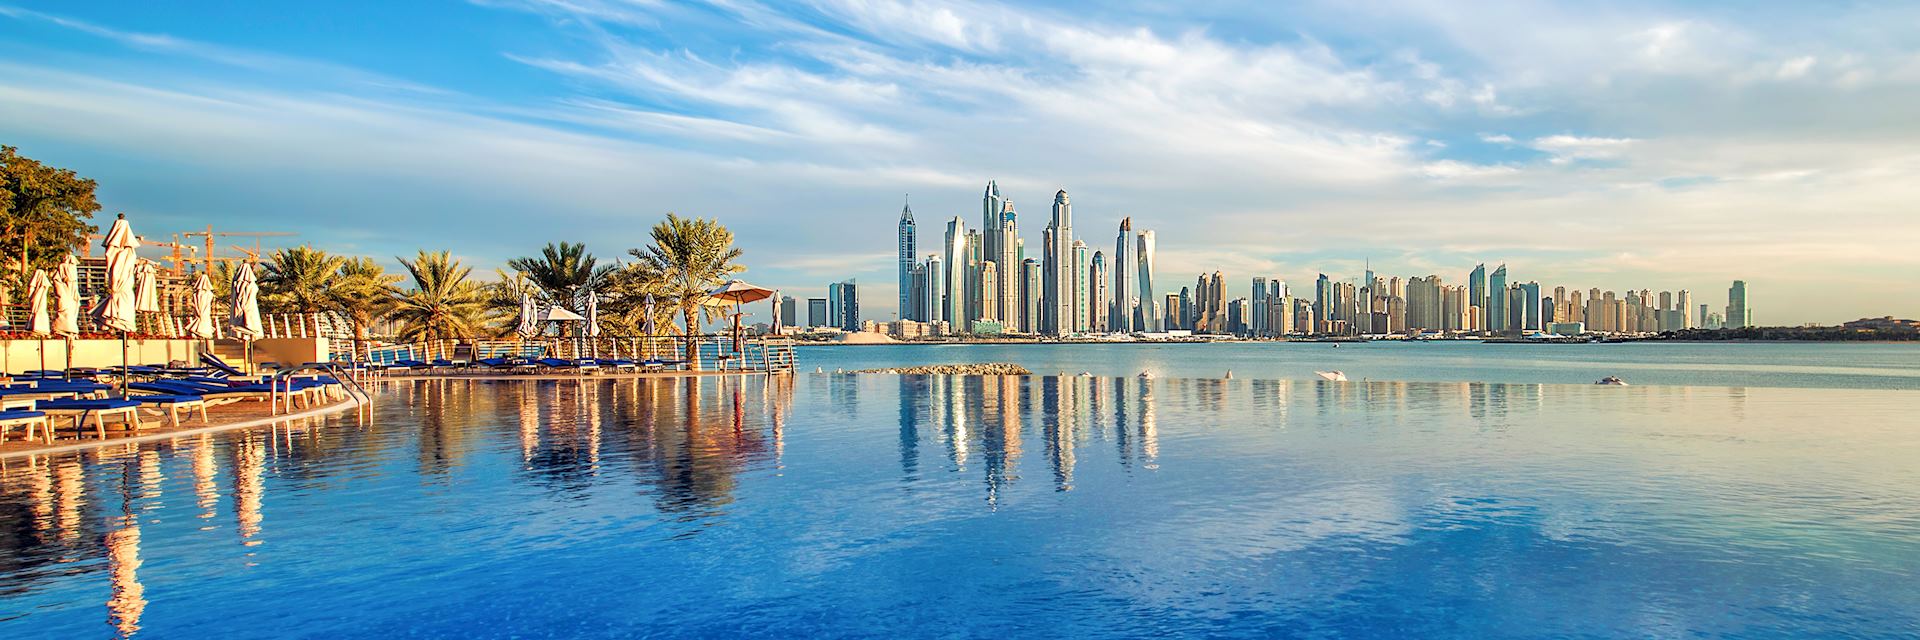 Best Time To Visit Dubai | Climate Guide | Audley Travel